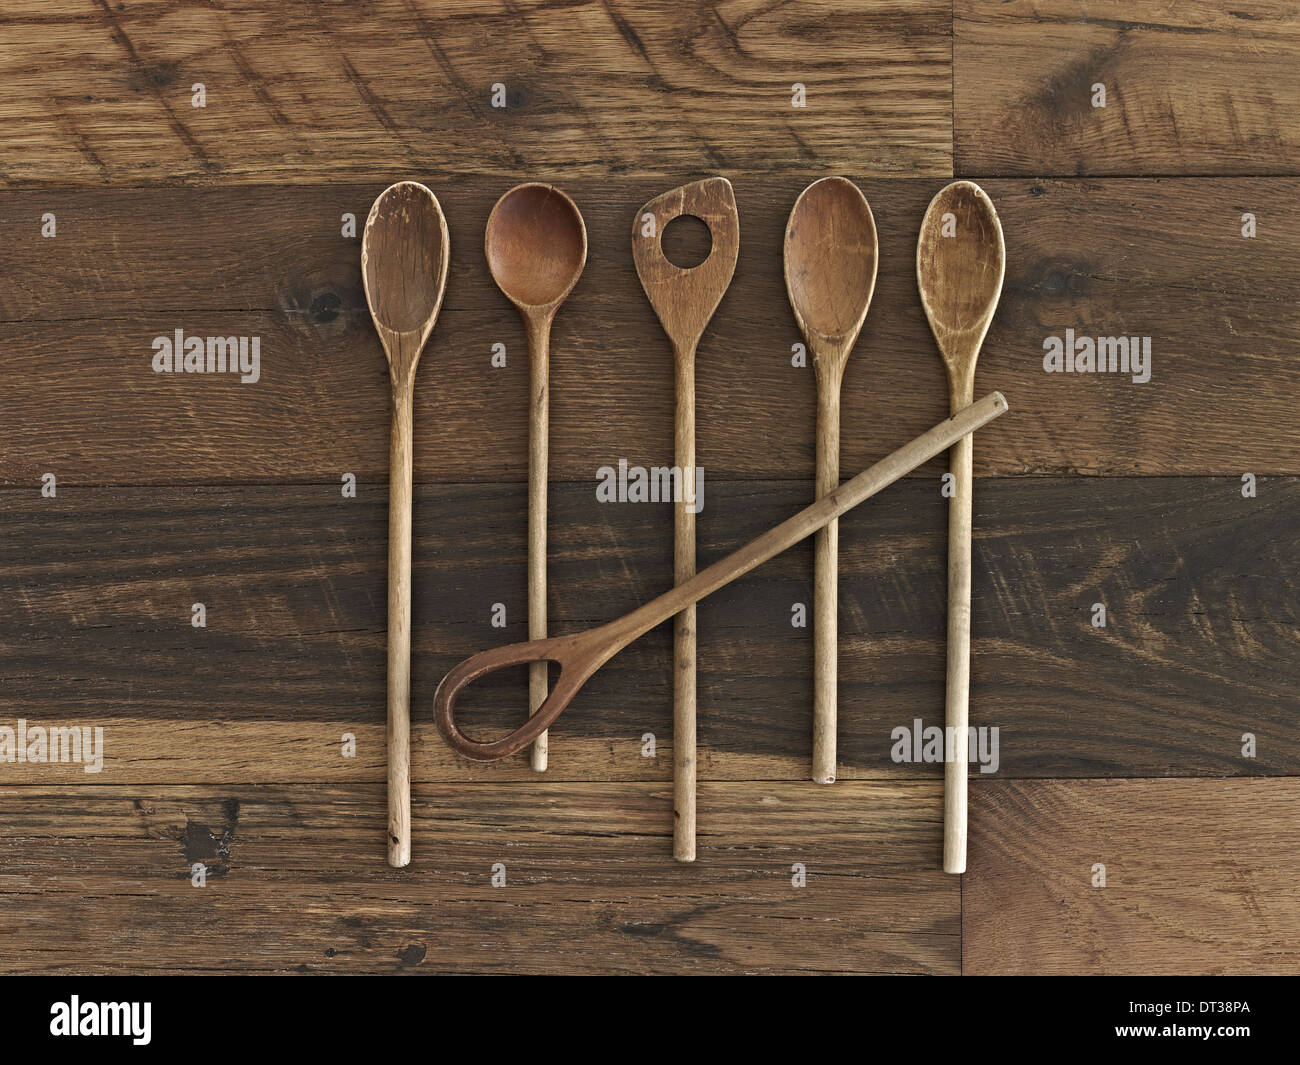 An arrangement of six wooden spoons of a variety of shapes and sizes on a wooden table. Stock Photo